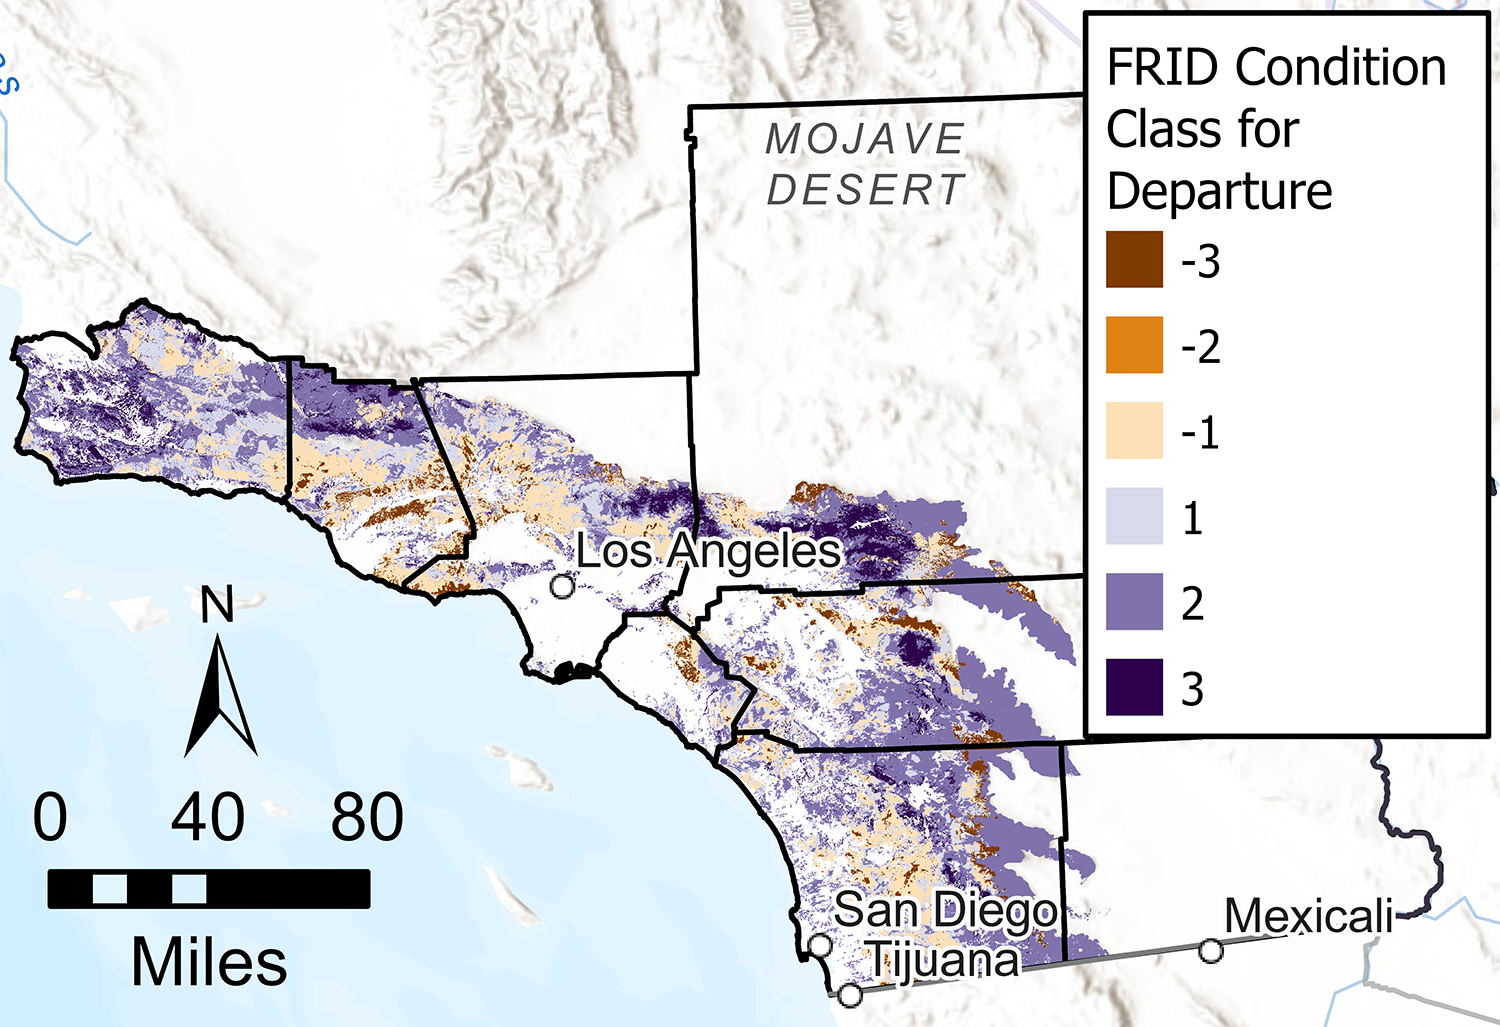 Chart of FRID Condition Class for Departure on Map of Southern California